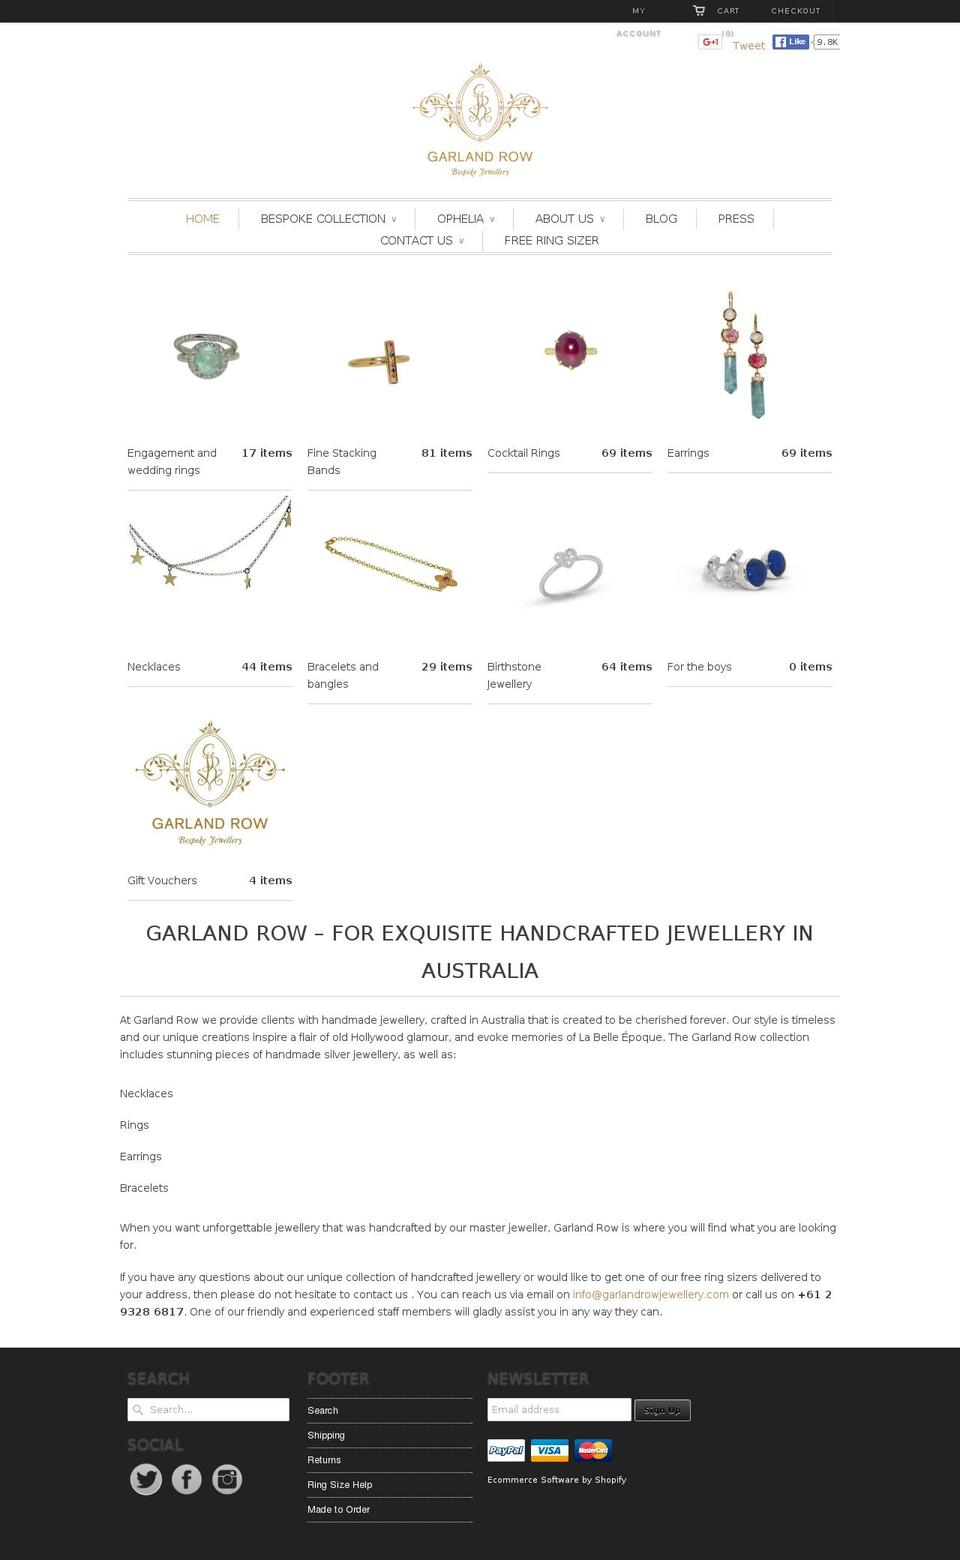 August Shopify theme site example garlandrowjewellery.com